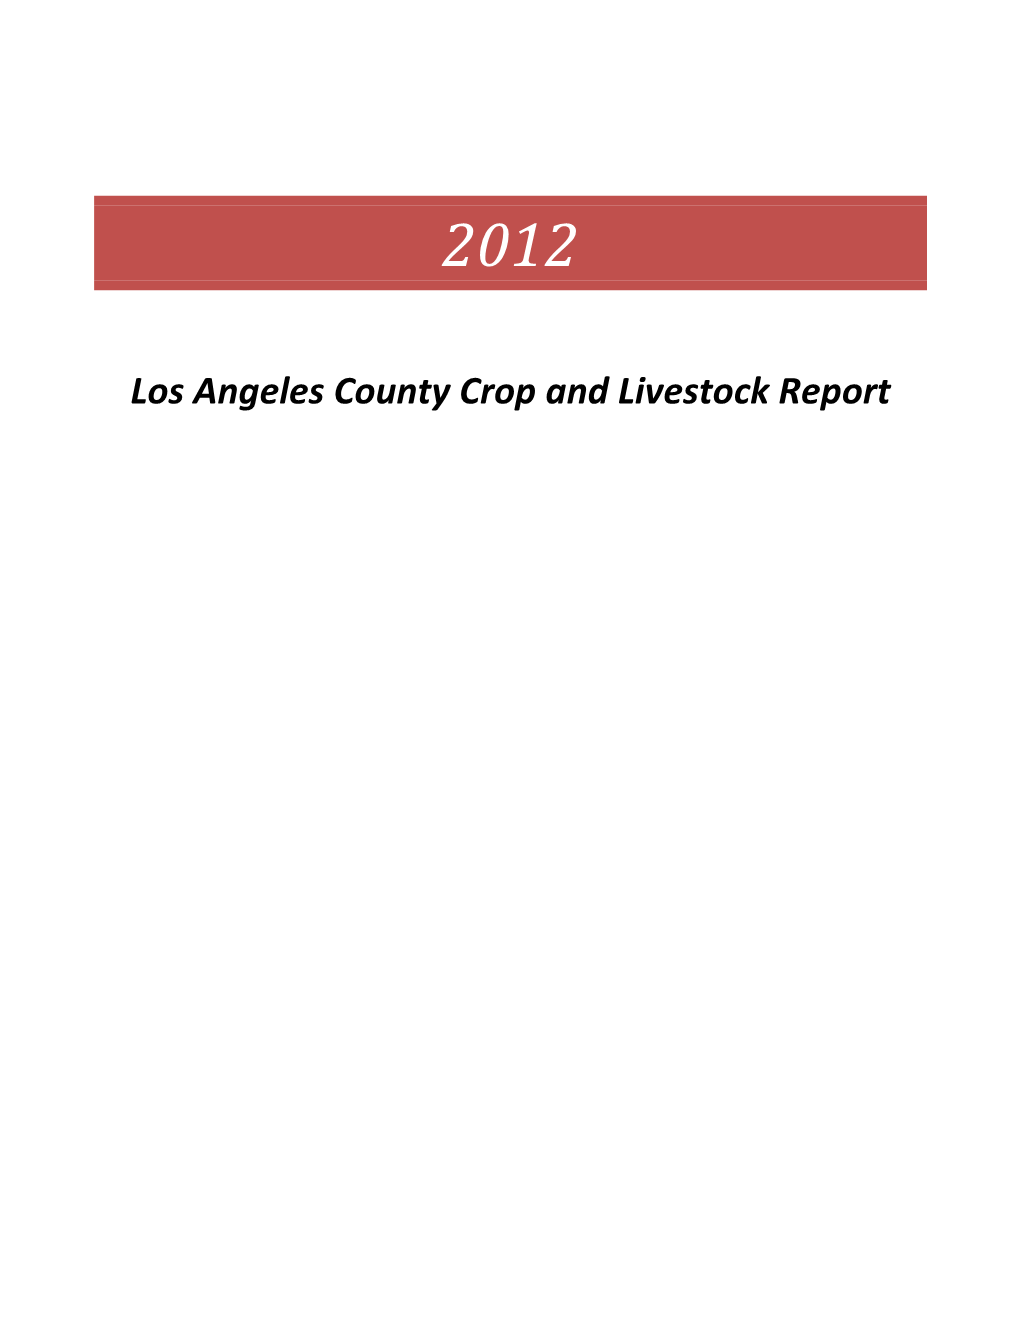 Los Angeles County Crop and Livestock Report Table of Contents